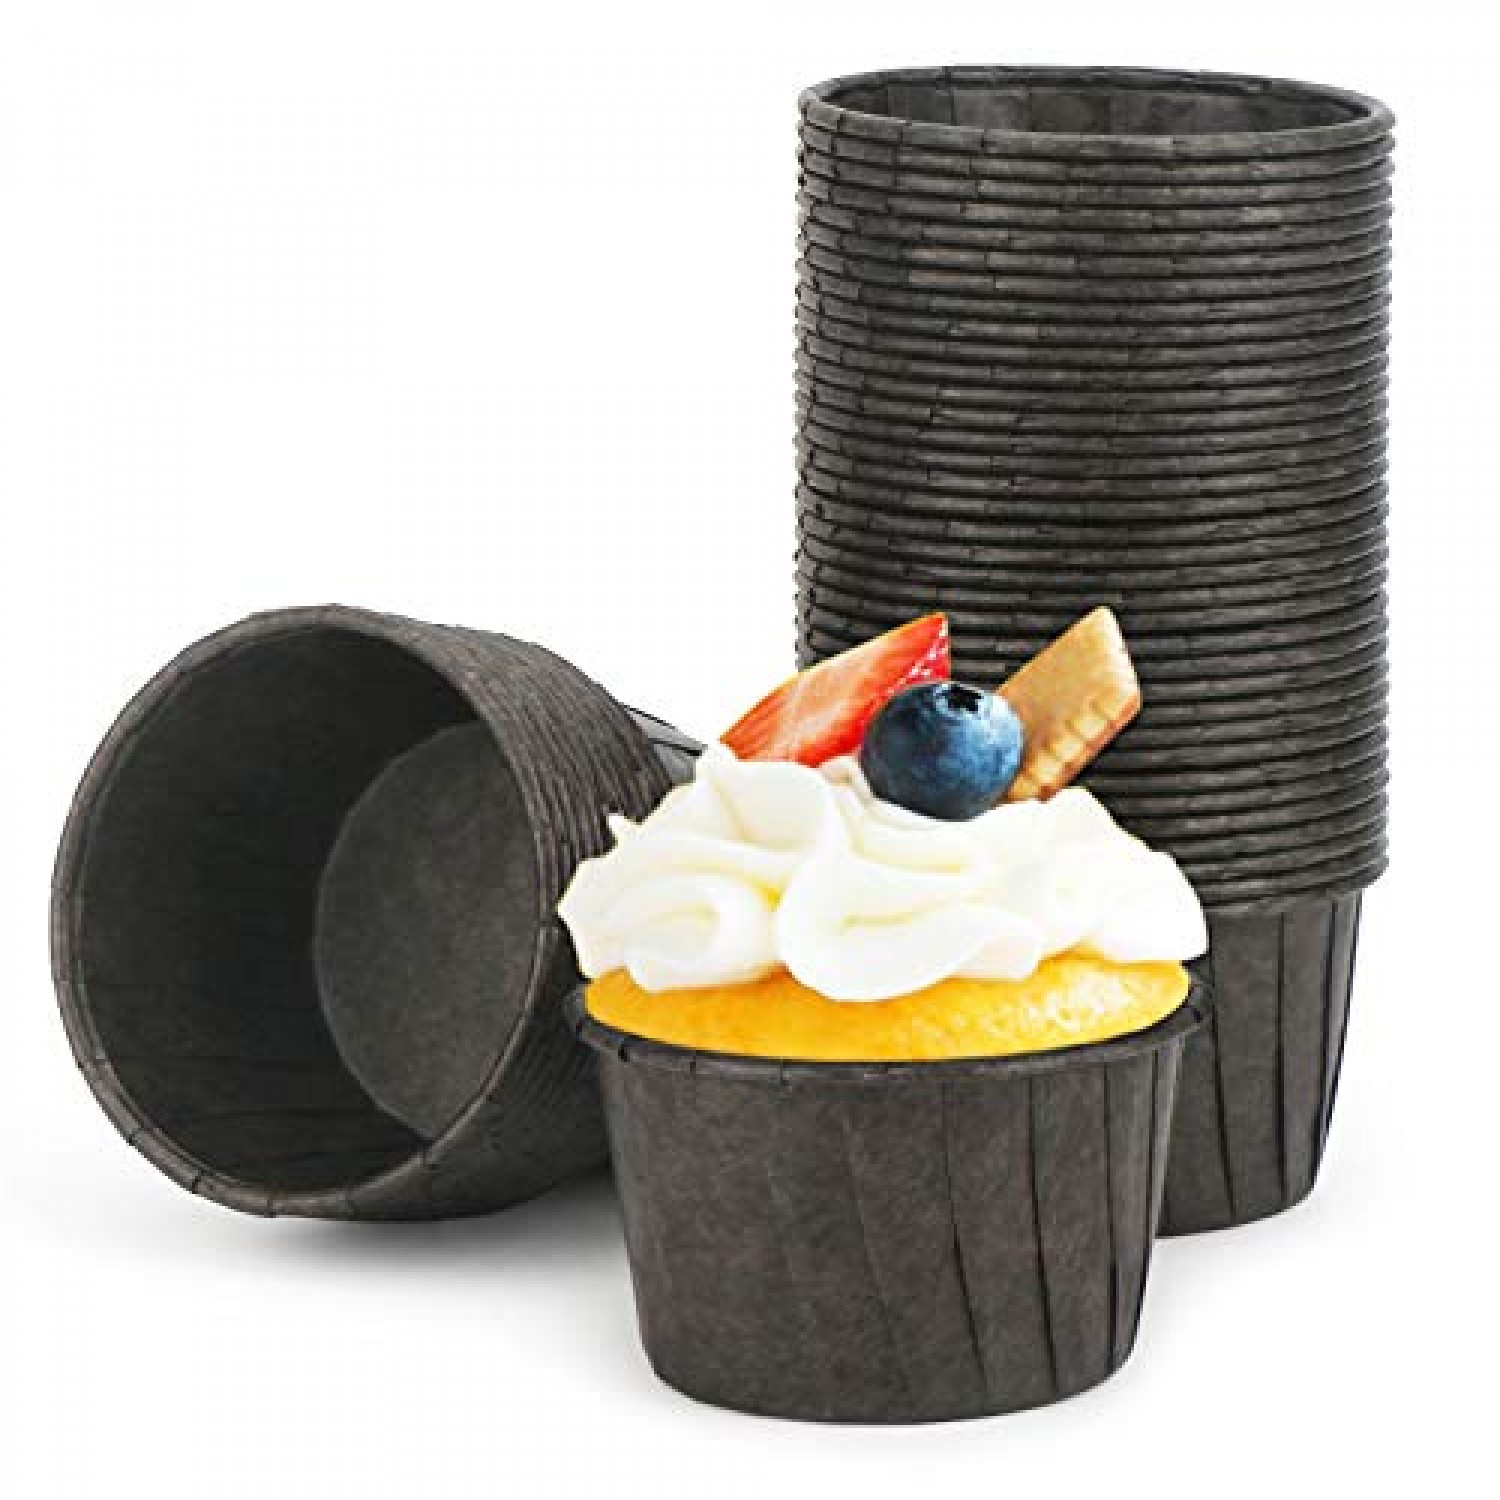 Liner Party Supplies Baking Mold Muffin Cases Cake Paper Cups Cupcake Wrappers 